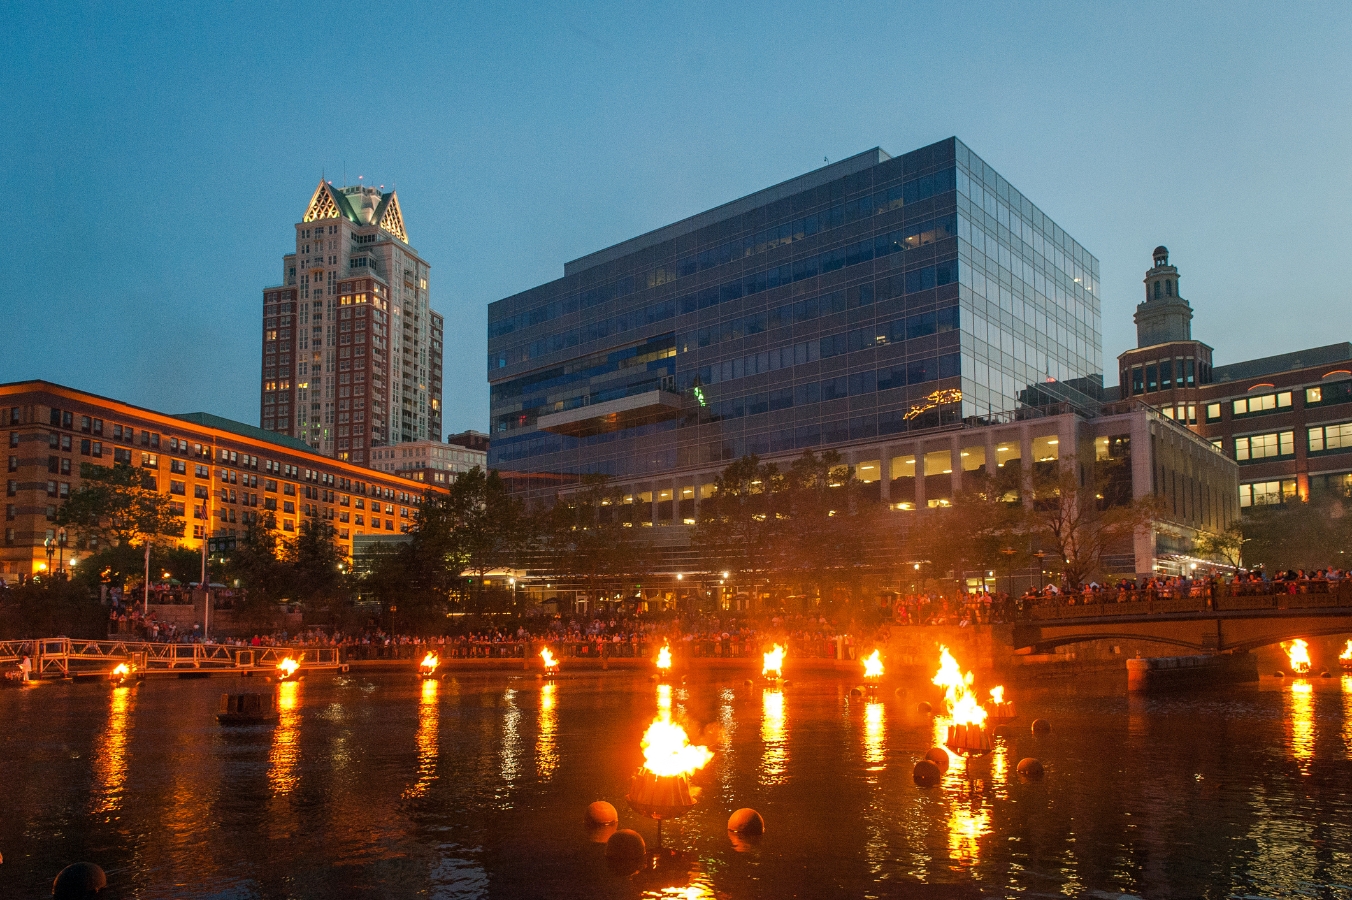 WaterFire Event in Waterplace Park of Providence